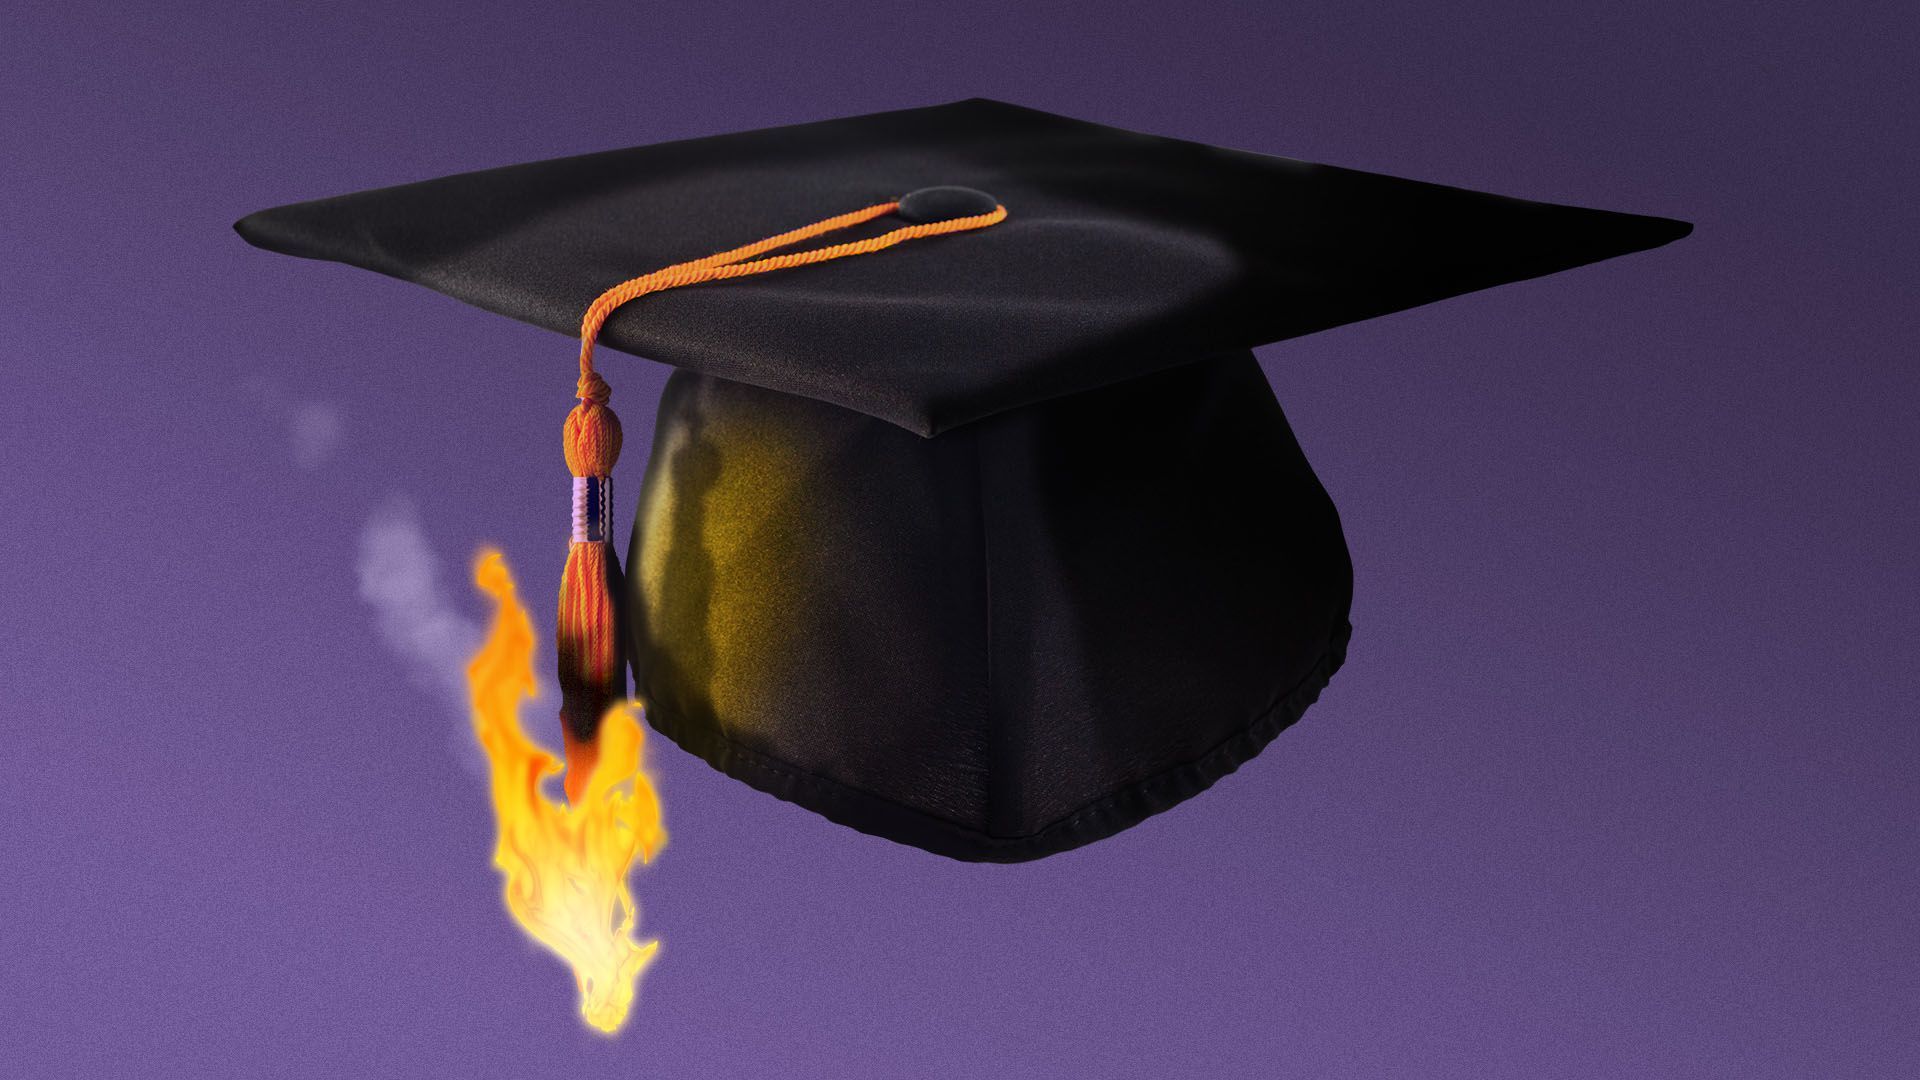 Illustration of a graduation cap with the tassel on fire